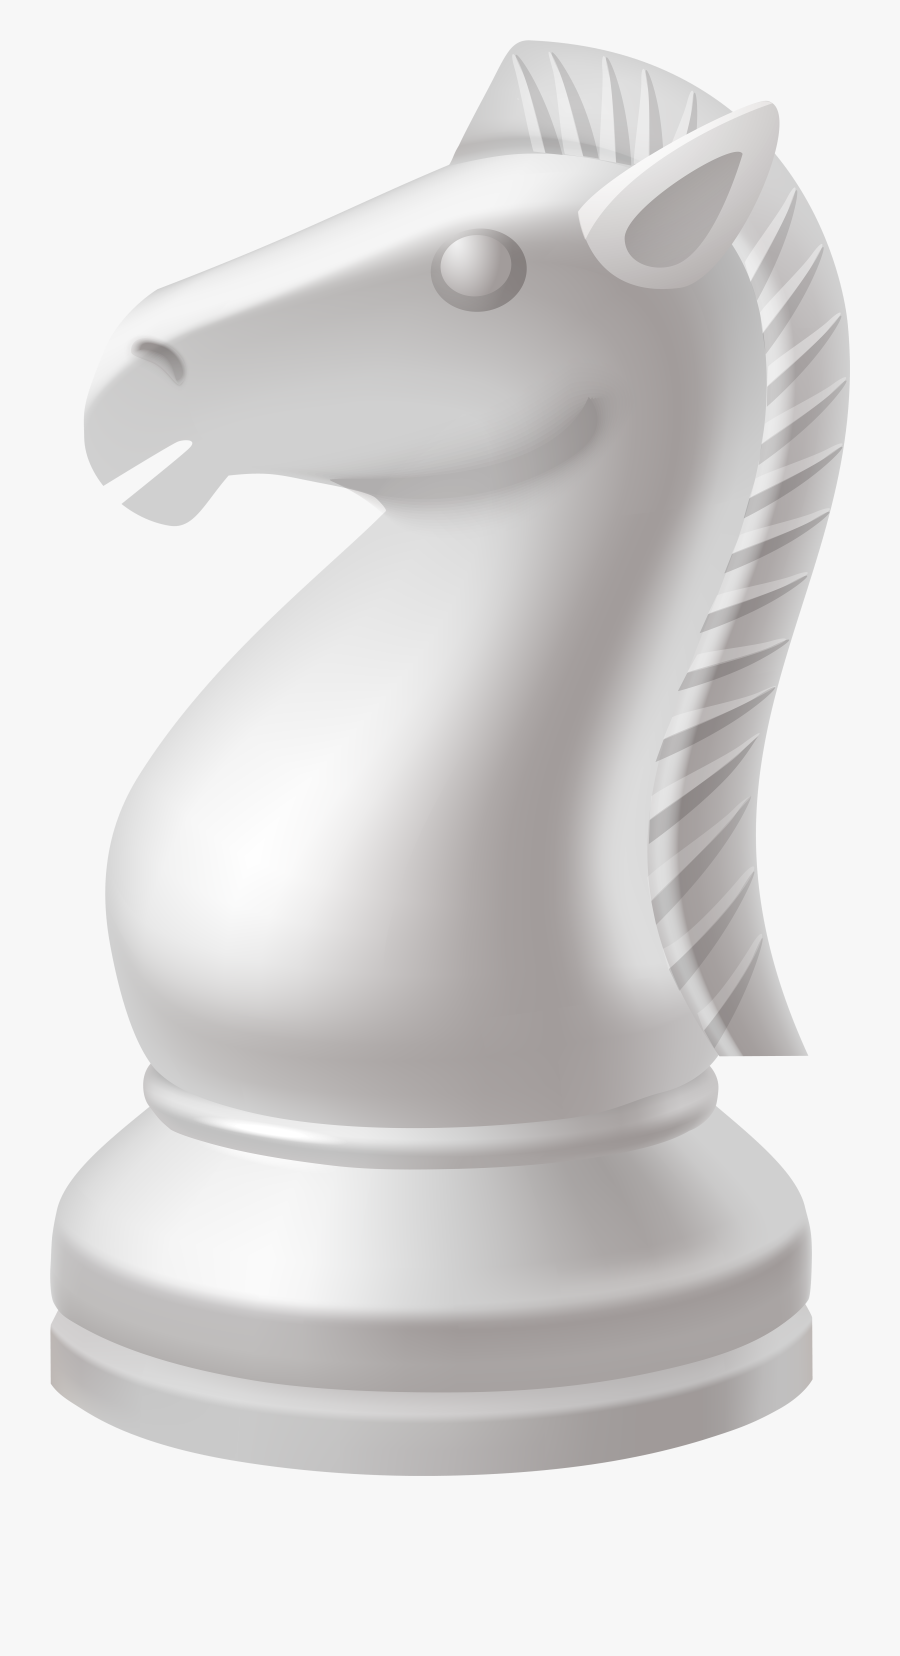 Knight Chess Piece Png - White Knight Chess Piece Png , Free ...